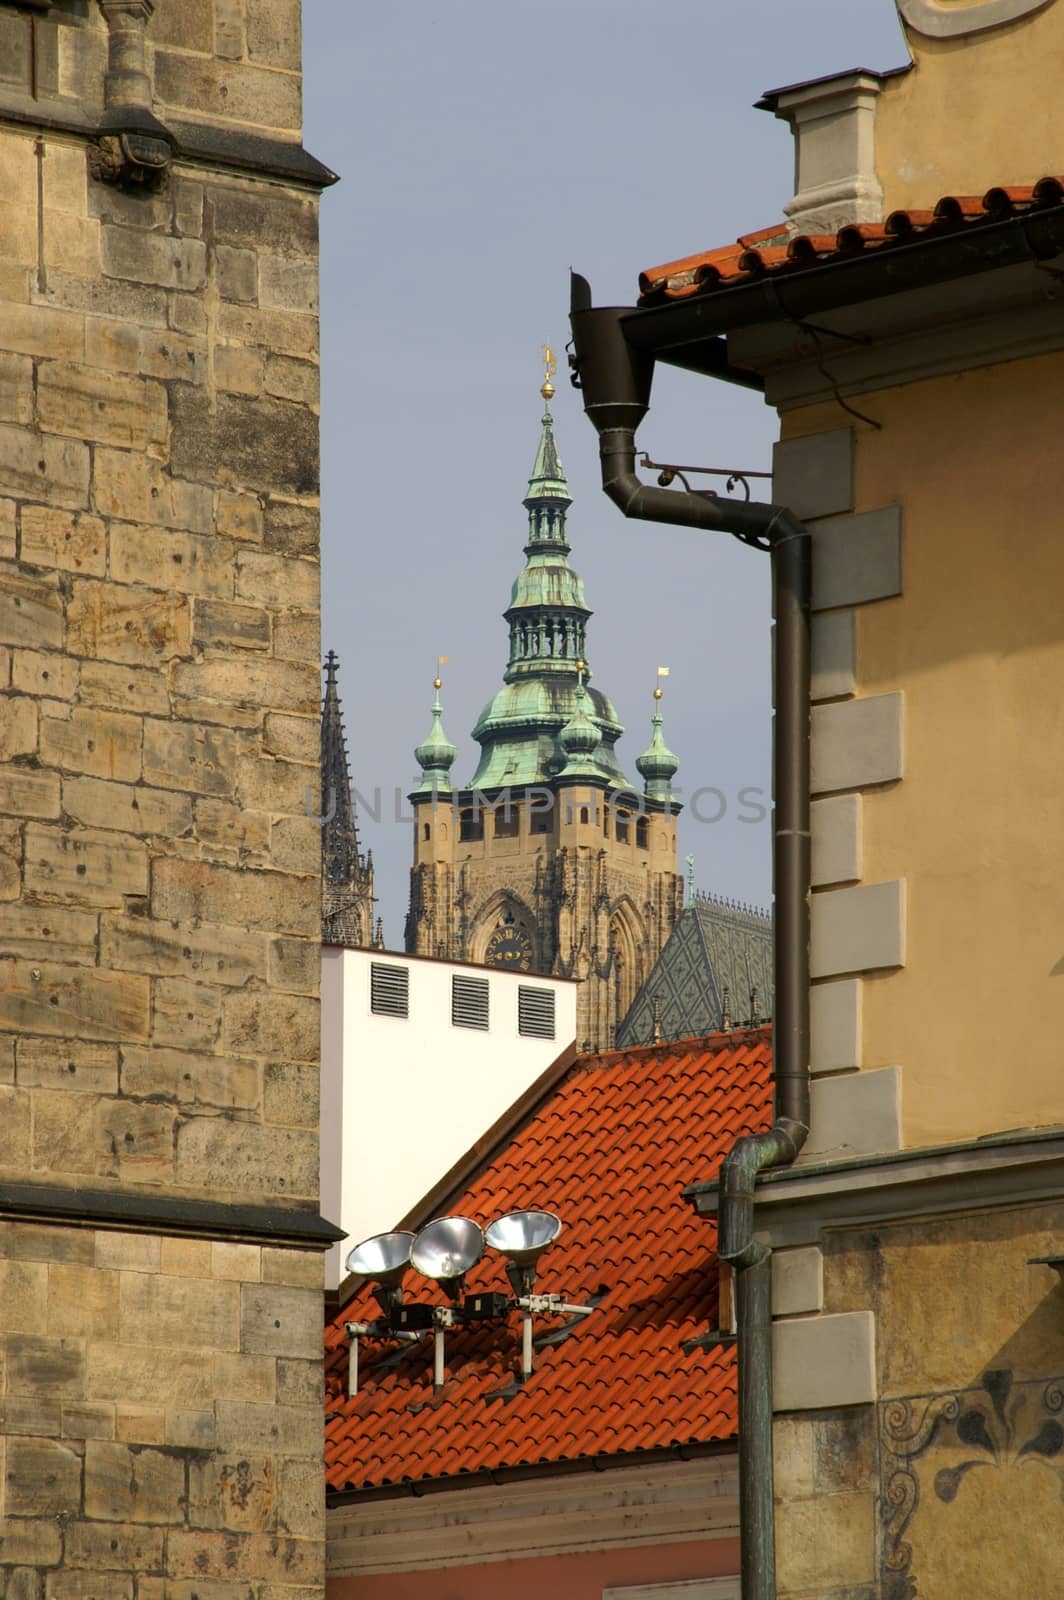 prague old city towers and churches - vacation in the heart of east europe